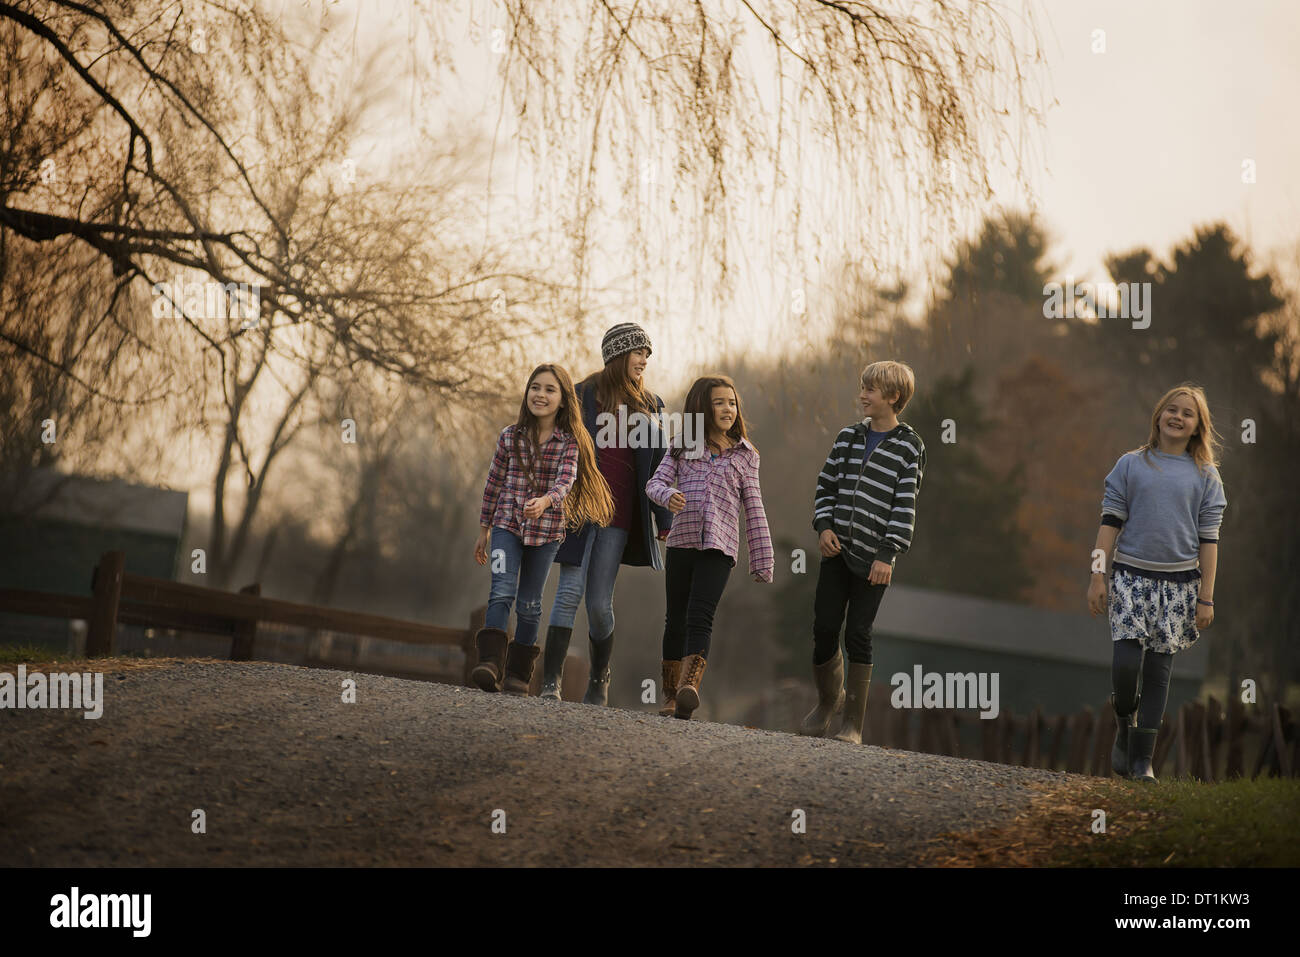 A group of children a boy and four girls walking along a path on a winter's day An organic farm Stock Photo